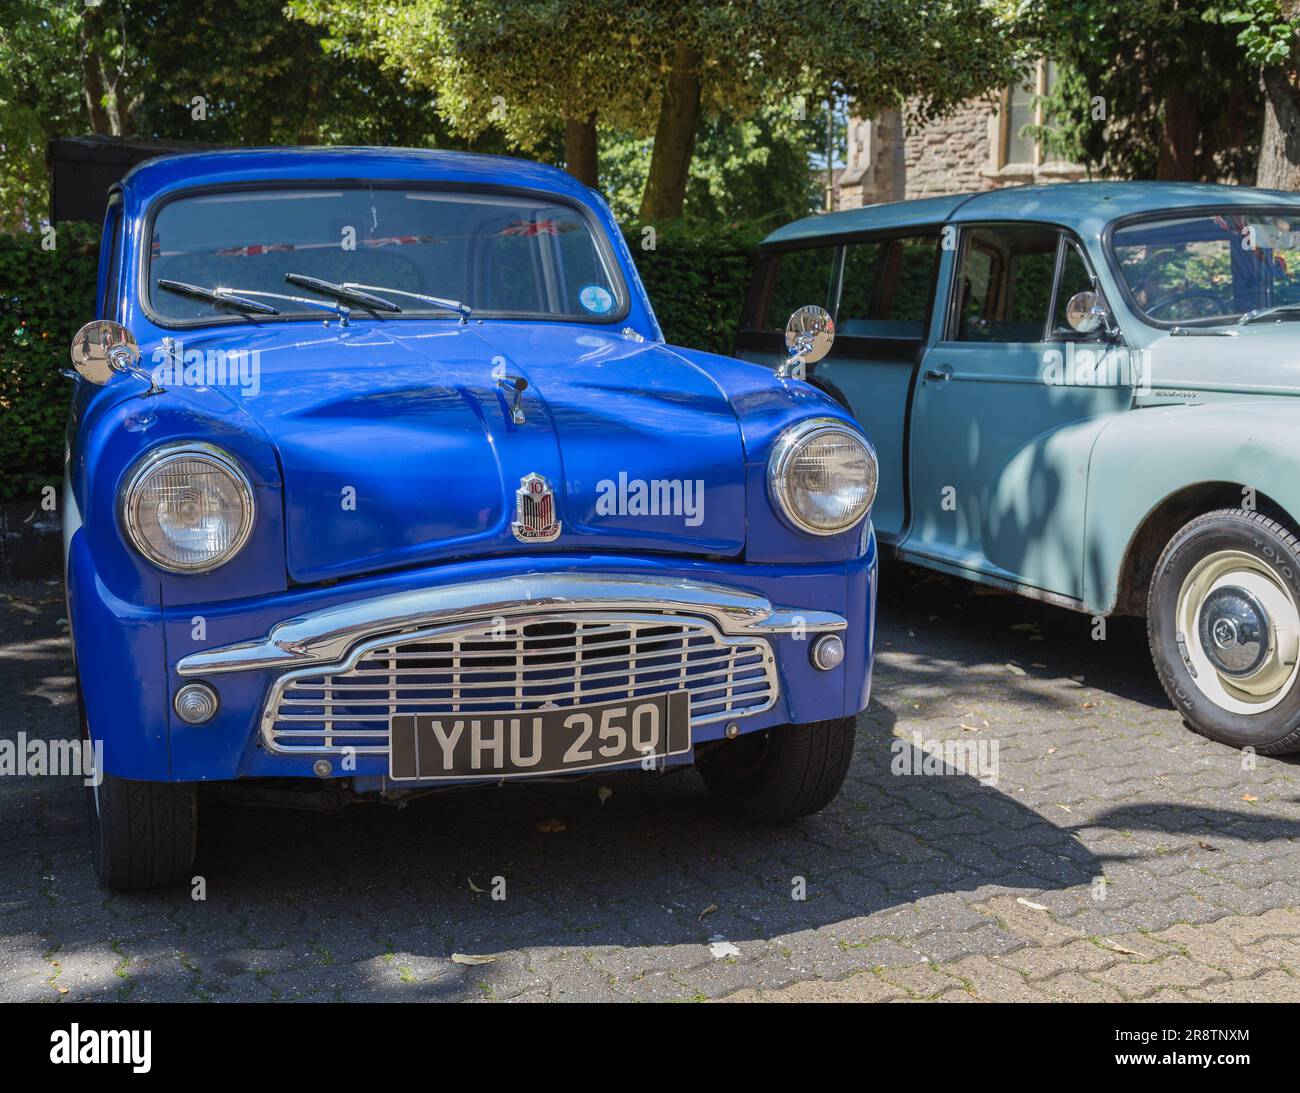 A 1950s Standard Classic Ten at a Classic and Vintage car show. The Standard Motor Company Limited was a British motor vehicle manufacturer. Stock Photo